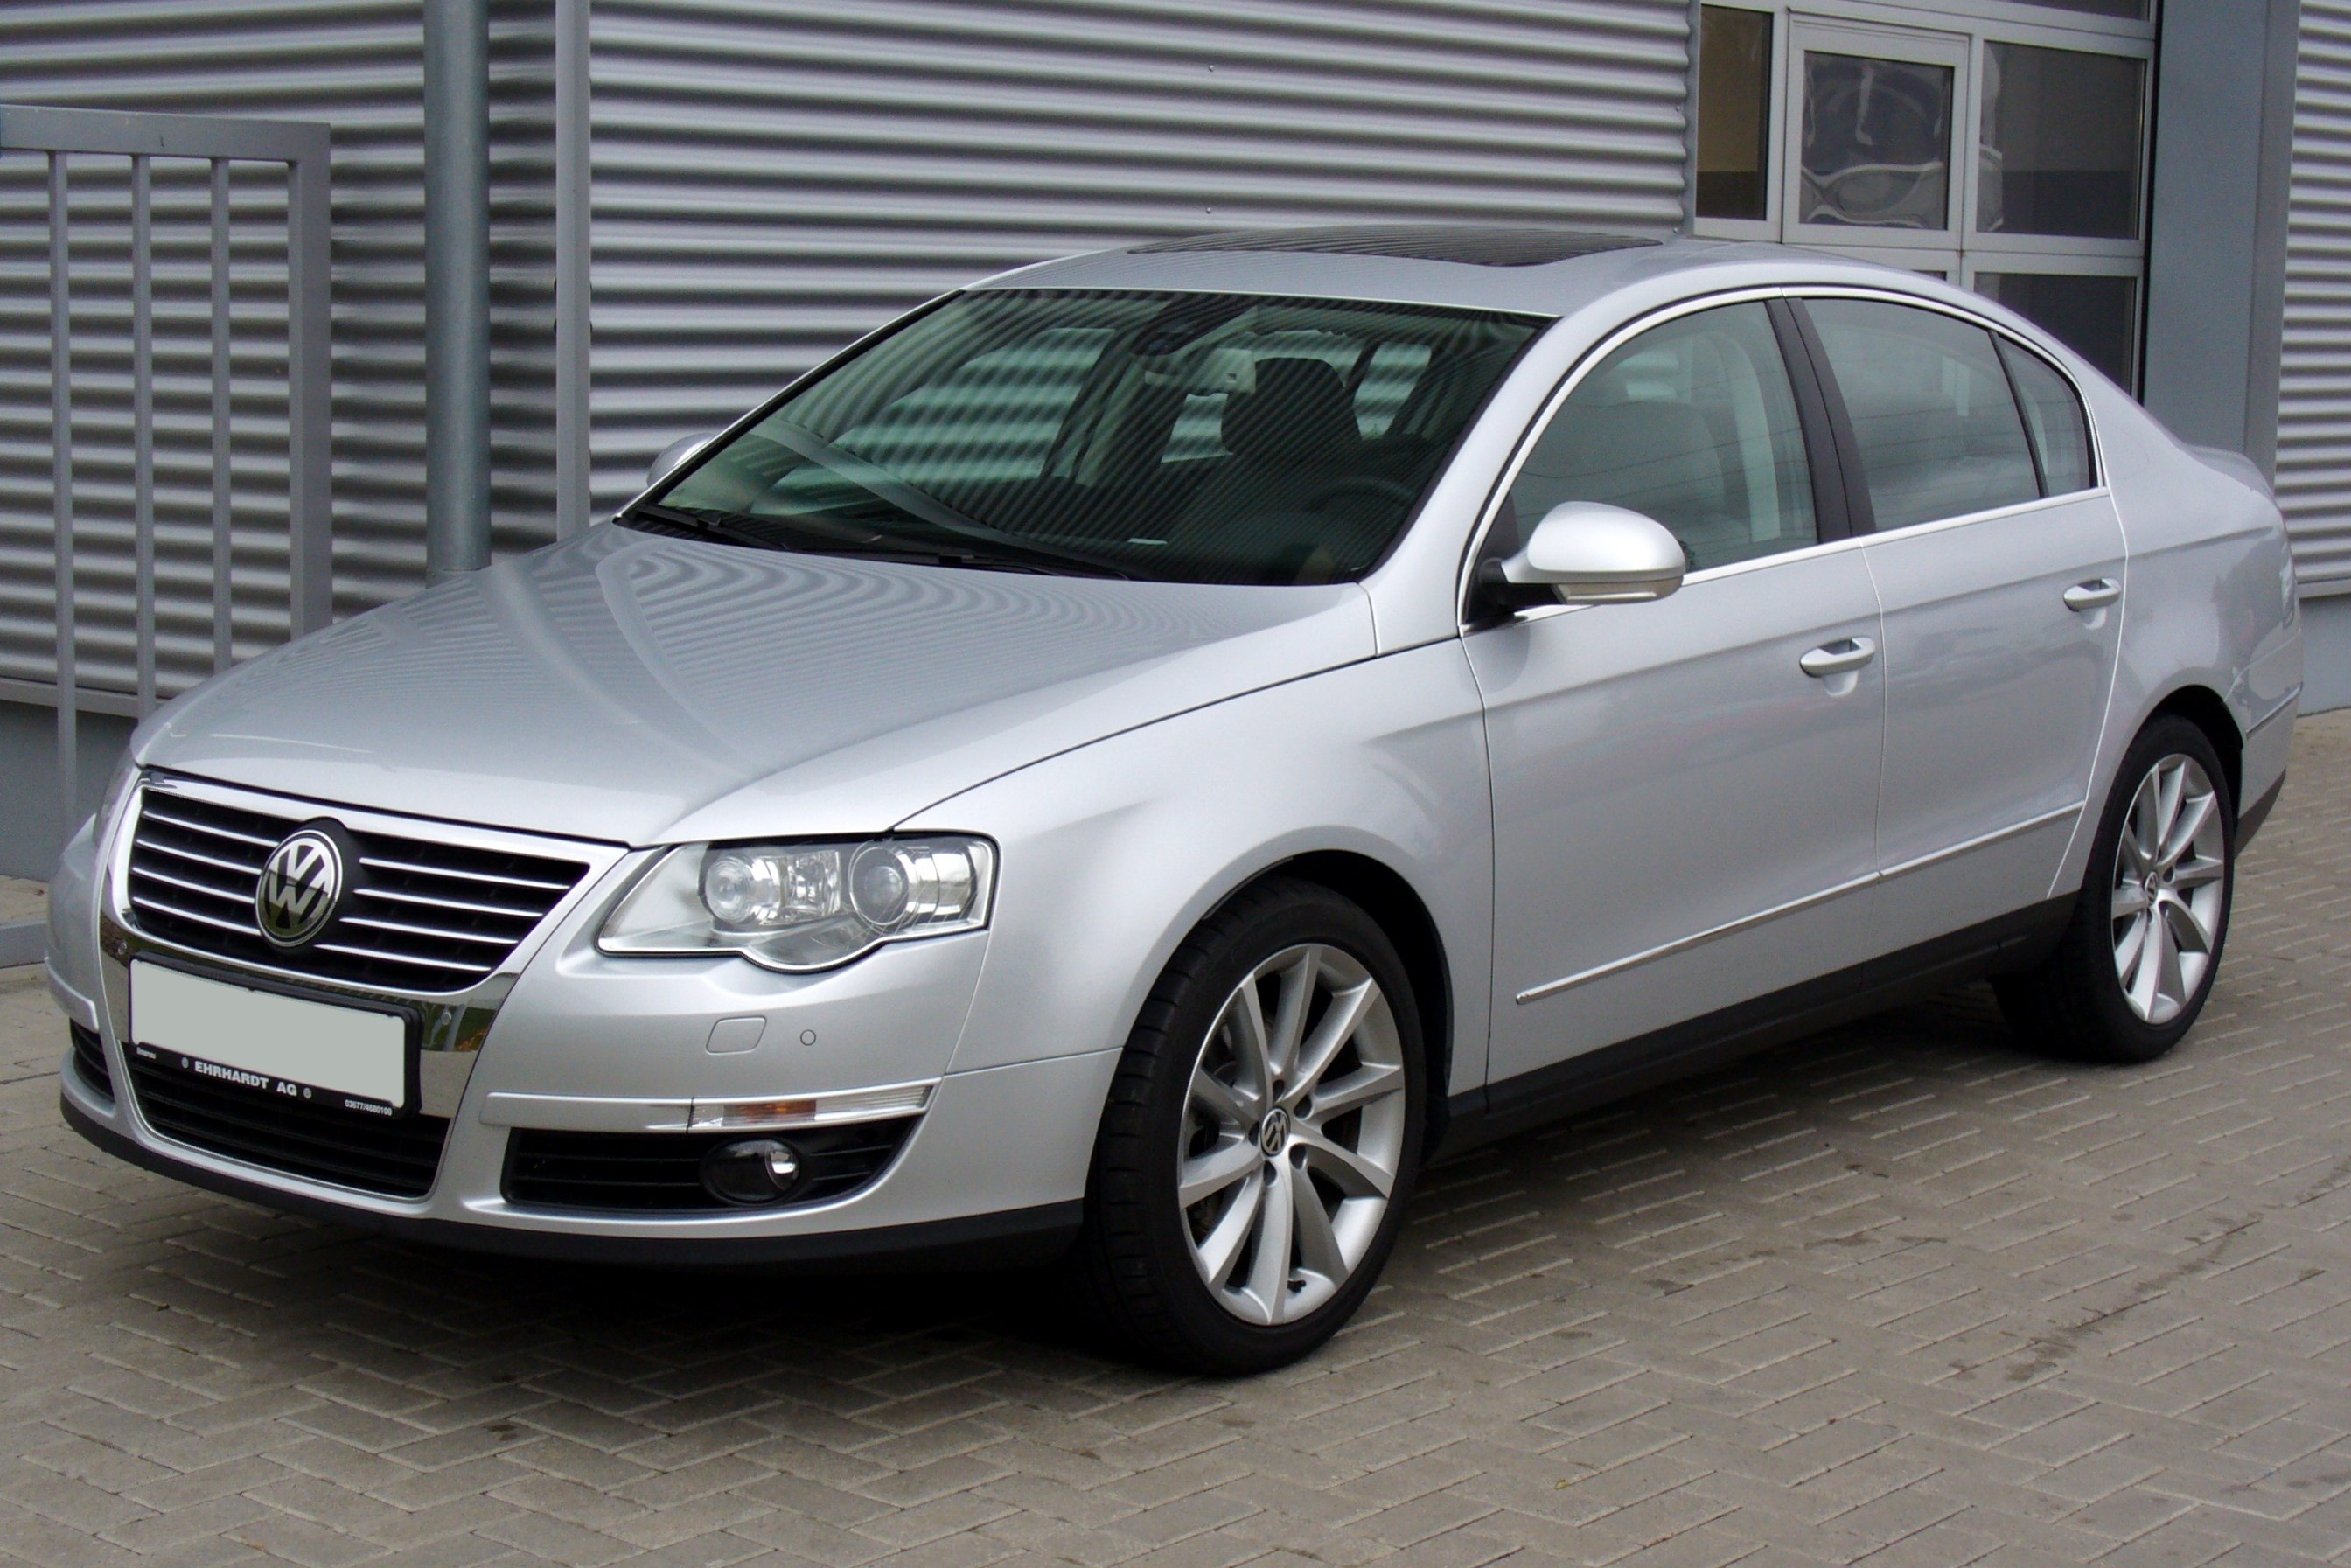 Volkswagen Passat B6 2007 Review Amazing Pictures and Images Look at the car